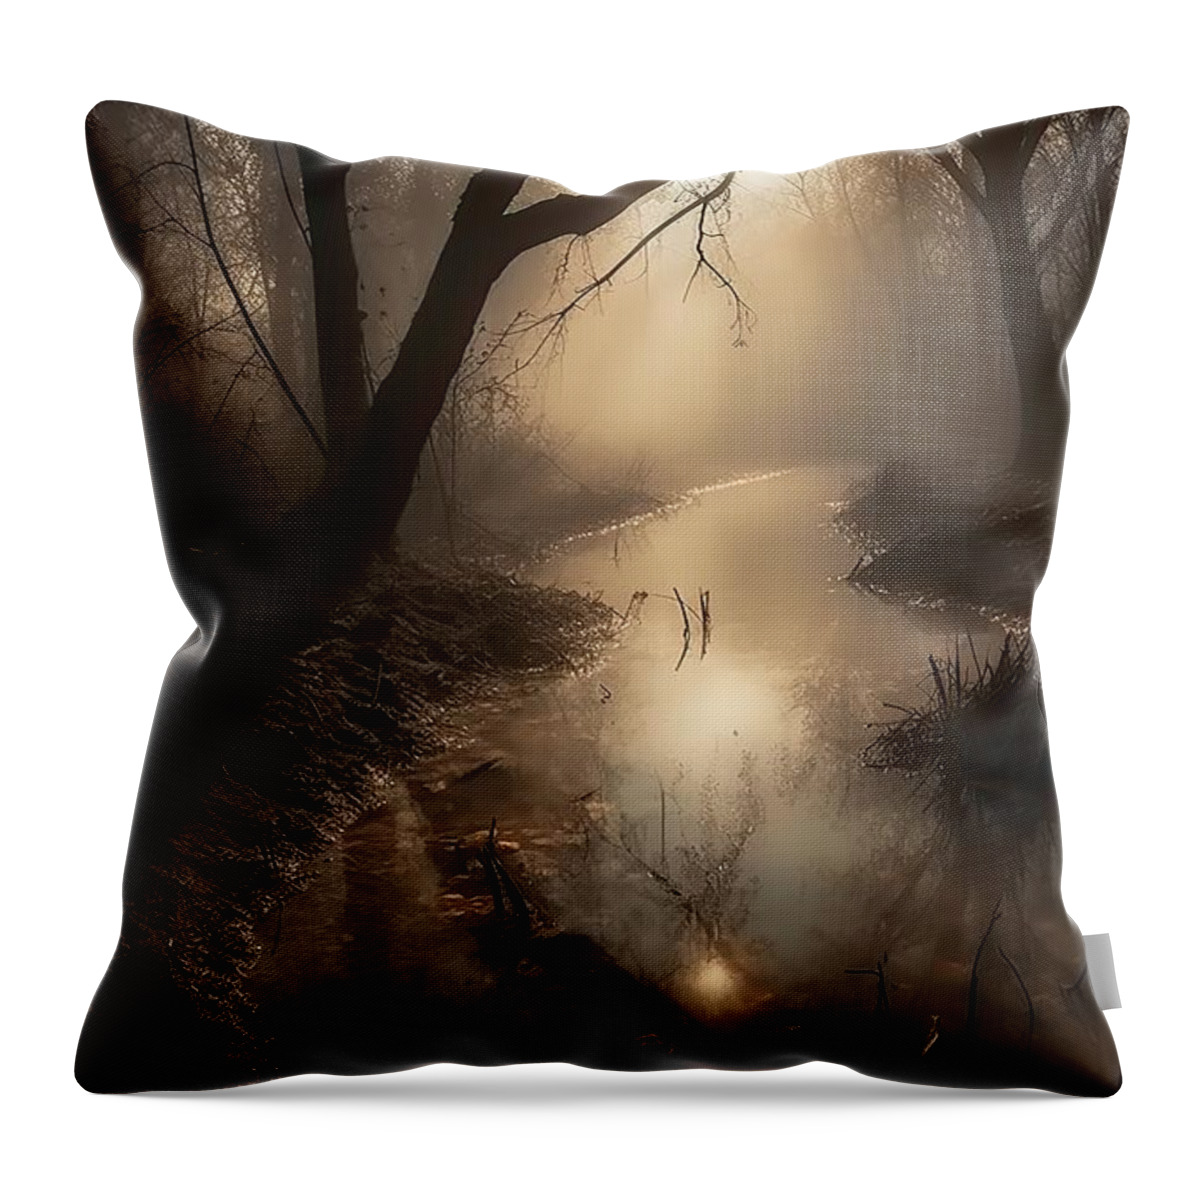 Foggy Morning Throw Pillow featuring the painting Foggy Morning III by Mindy Sommers